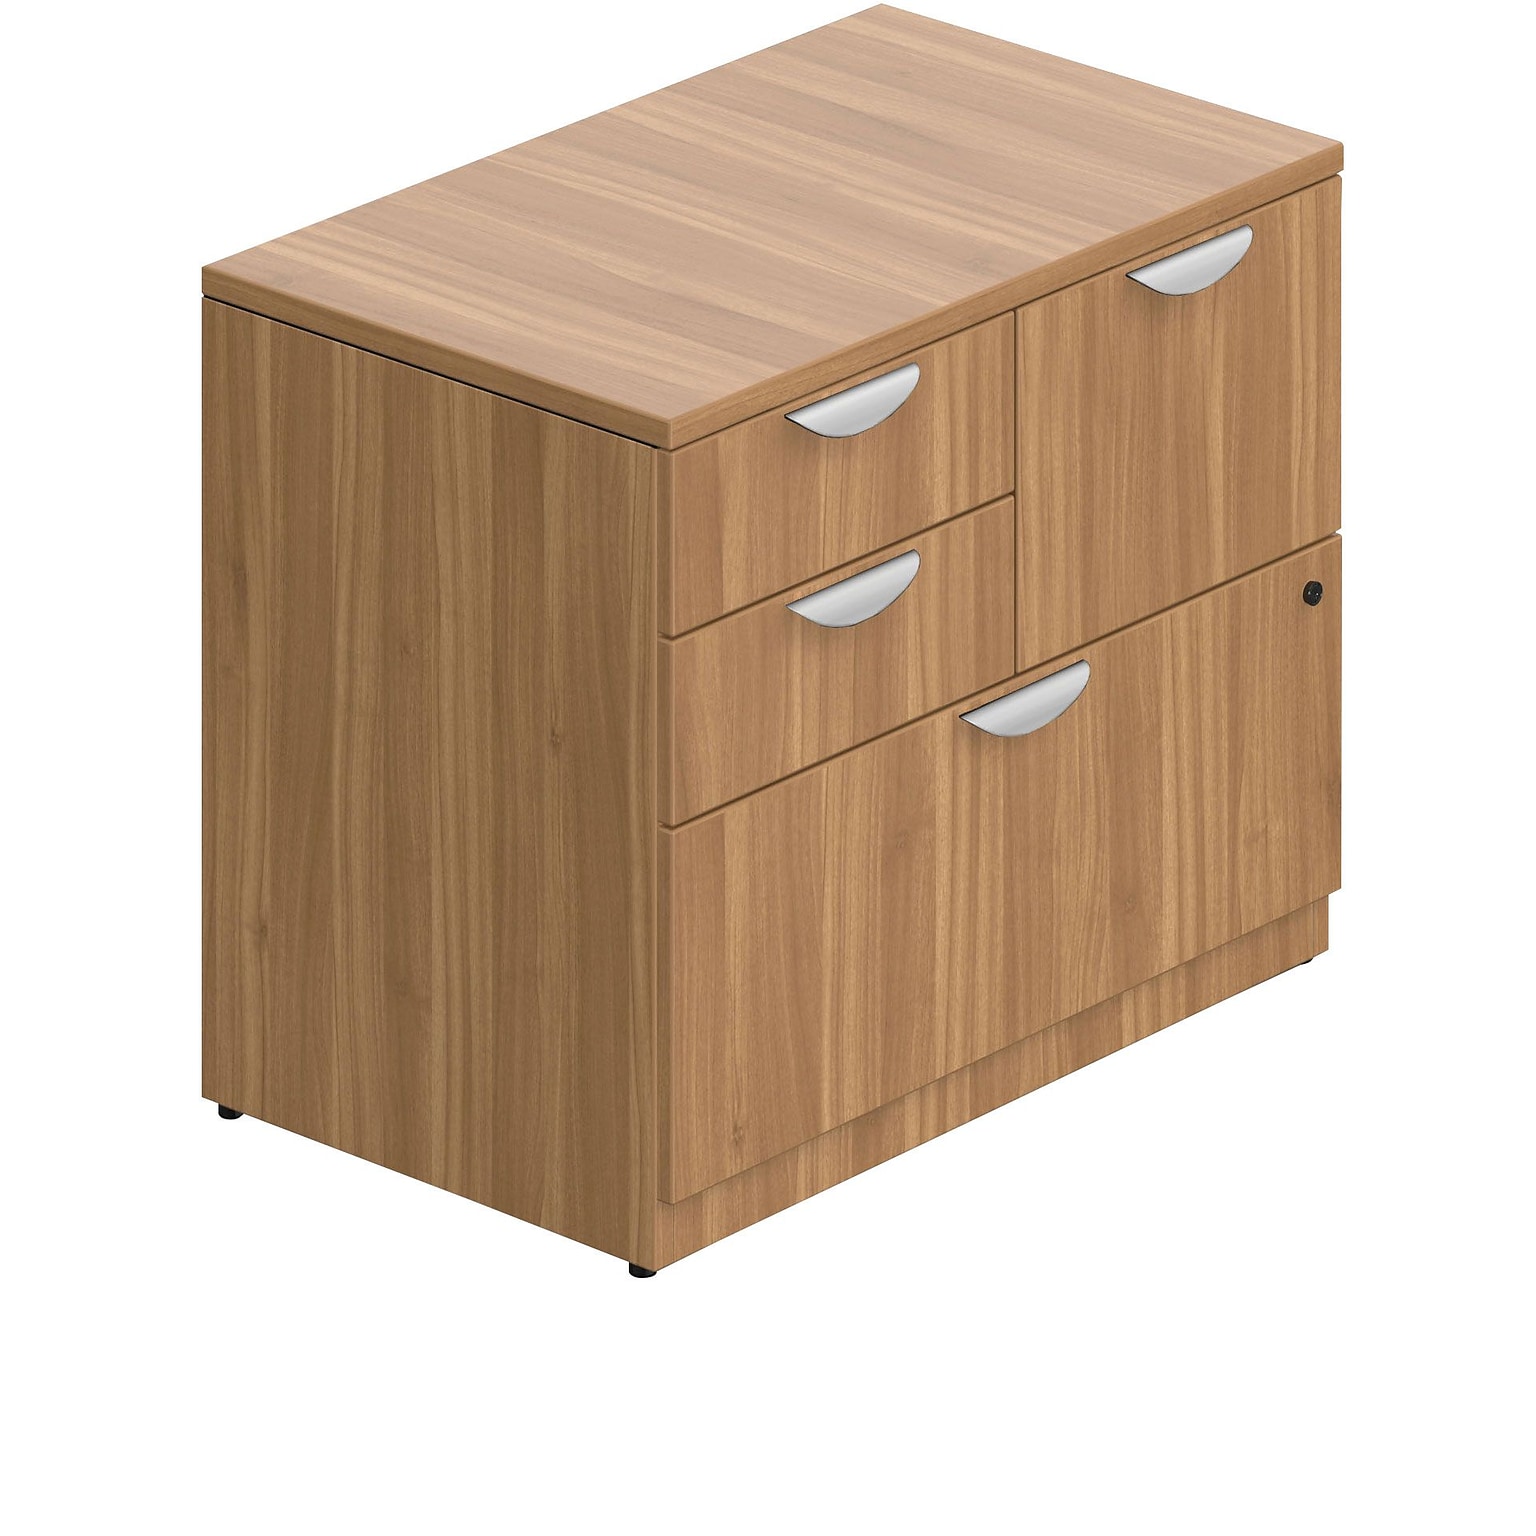 Offices to Go Superior Laminate Mixed Storage Unit with Lock, Autumn Walnut, 36W x 22D x 29.5H